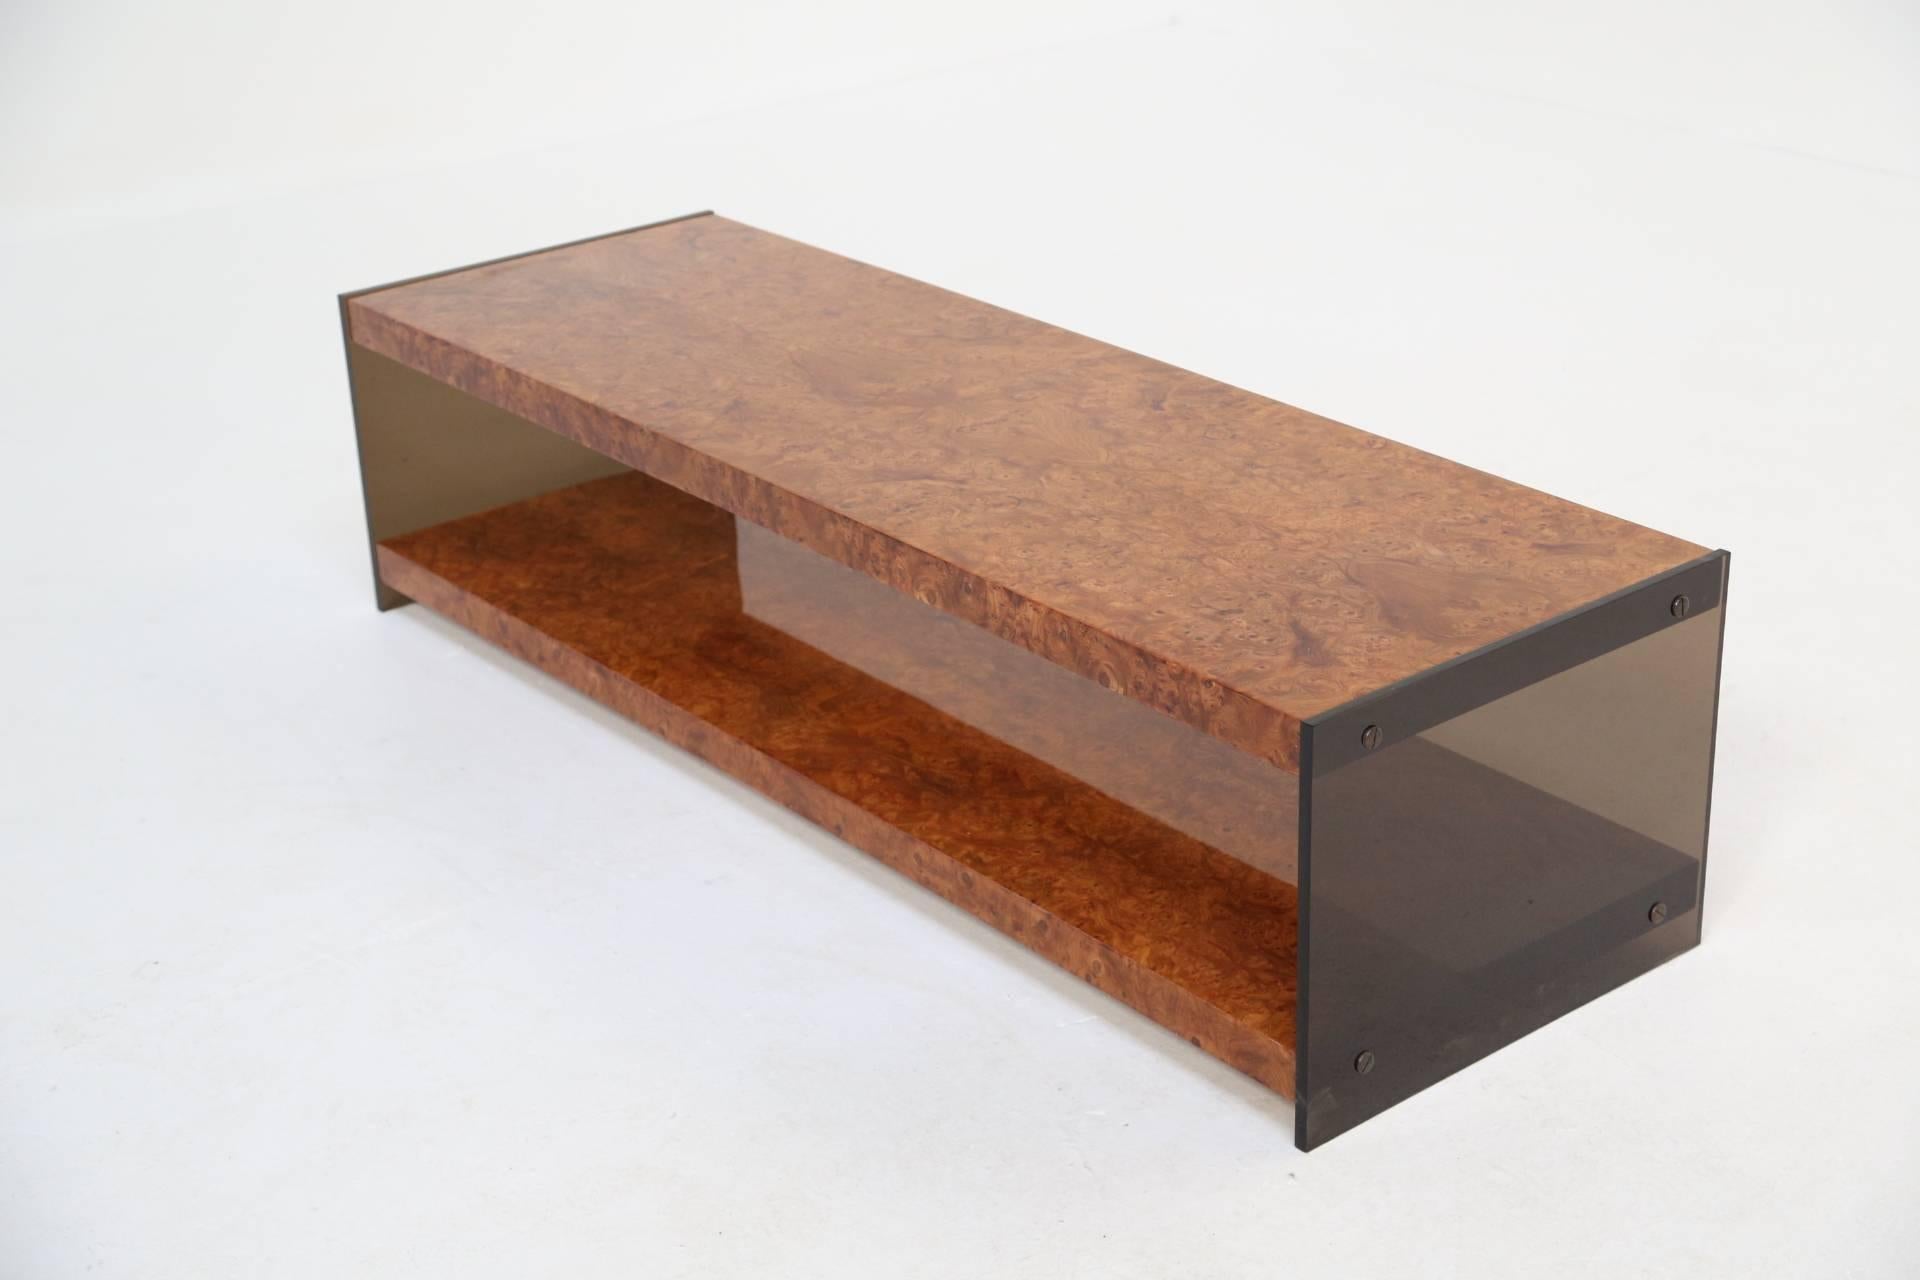 A burl wood two-tier coffee table with glass ends by Milo Baughman for Thayer Coggin. In immaculate condition this two-tier table has all the looks and also has plenty of space for coffee table books etc.
 